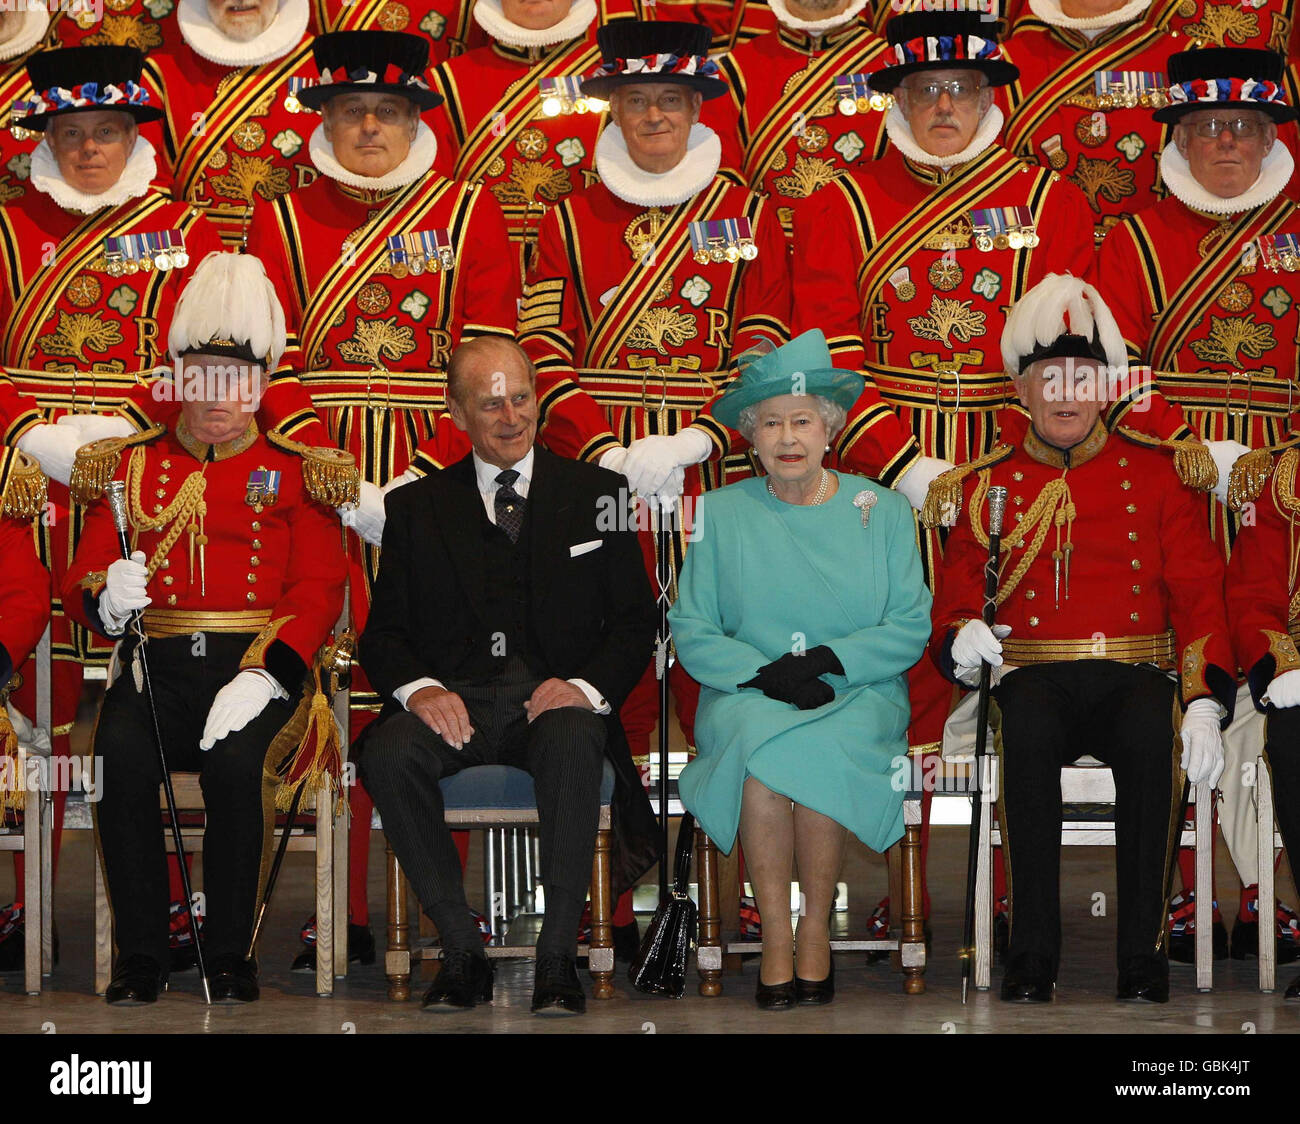 Britain's Queen Elizabeth II and the Duke of Edinburgh (centre) pose for a group photograph with members of The Queen's Body Guard of the Yeomen of the Guard at Westminster Abbey in London. Stock Photo